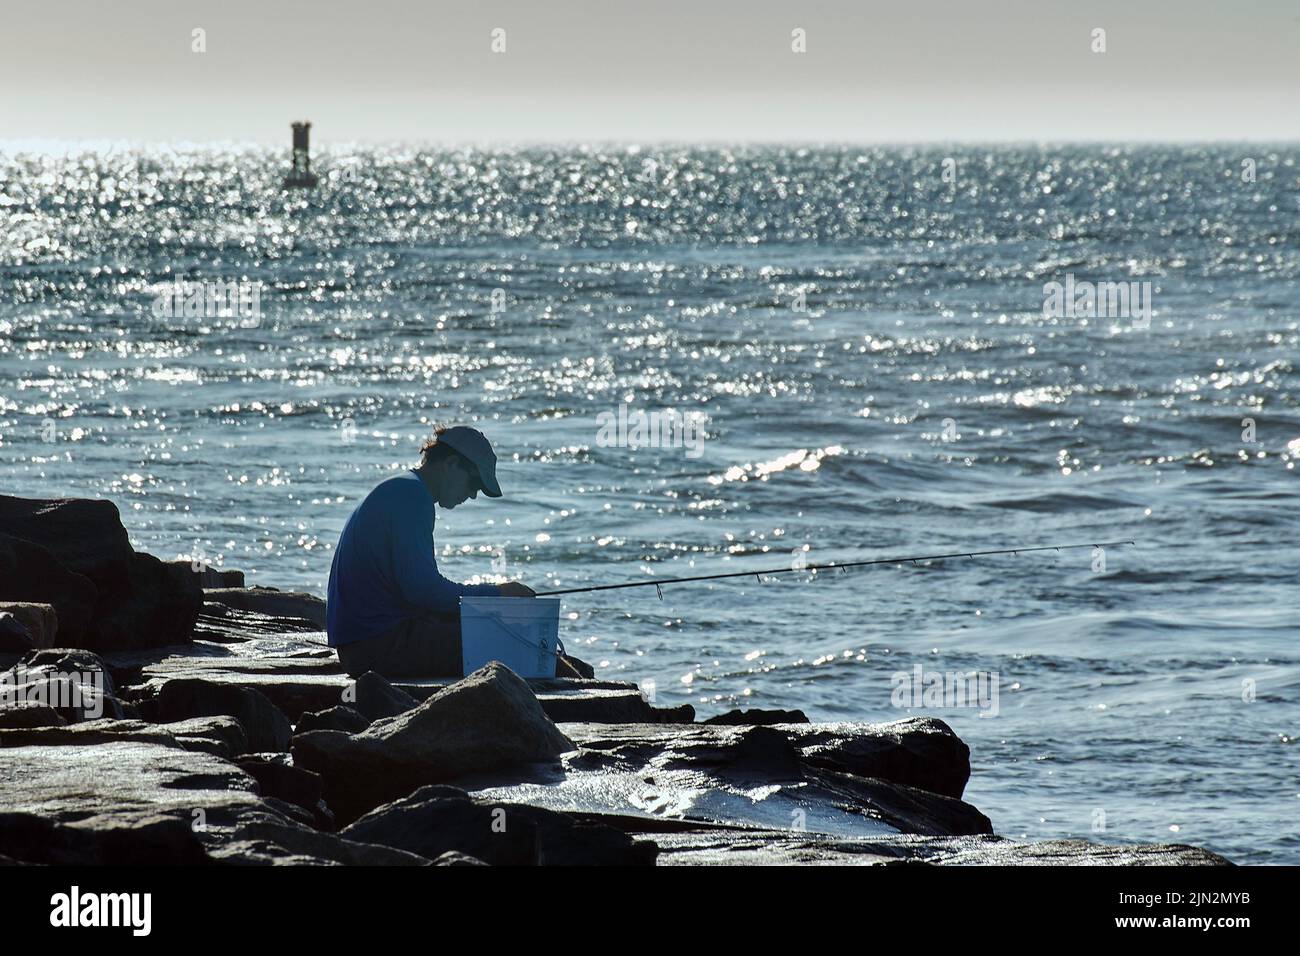 An early morning fisherman tends to his equipment on the breakwater of Indian River Inlet along the Delaware seashore. Stock Photo